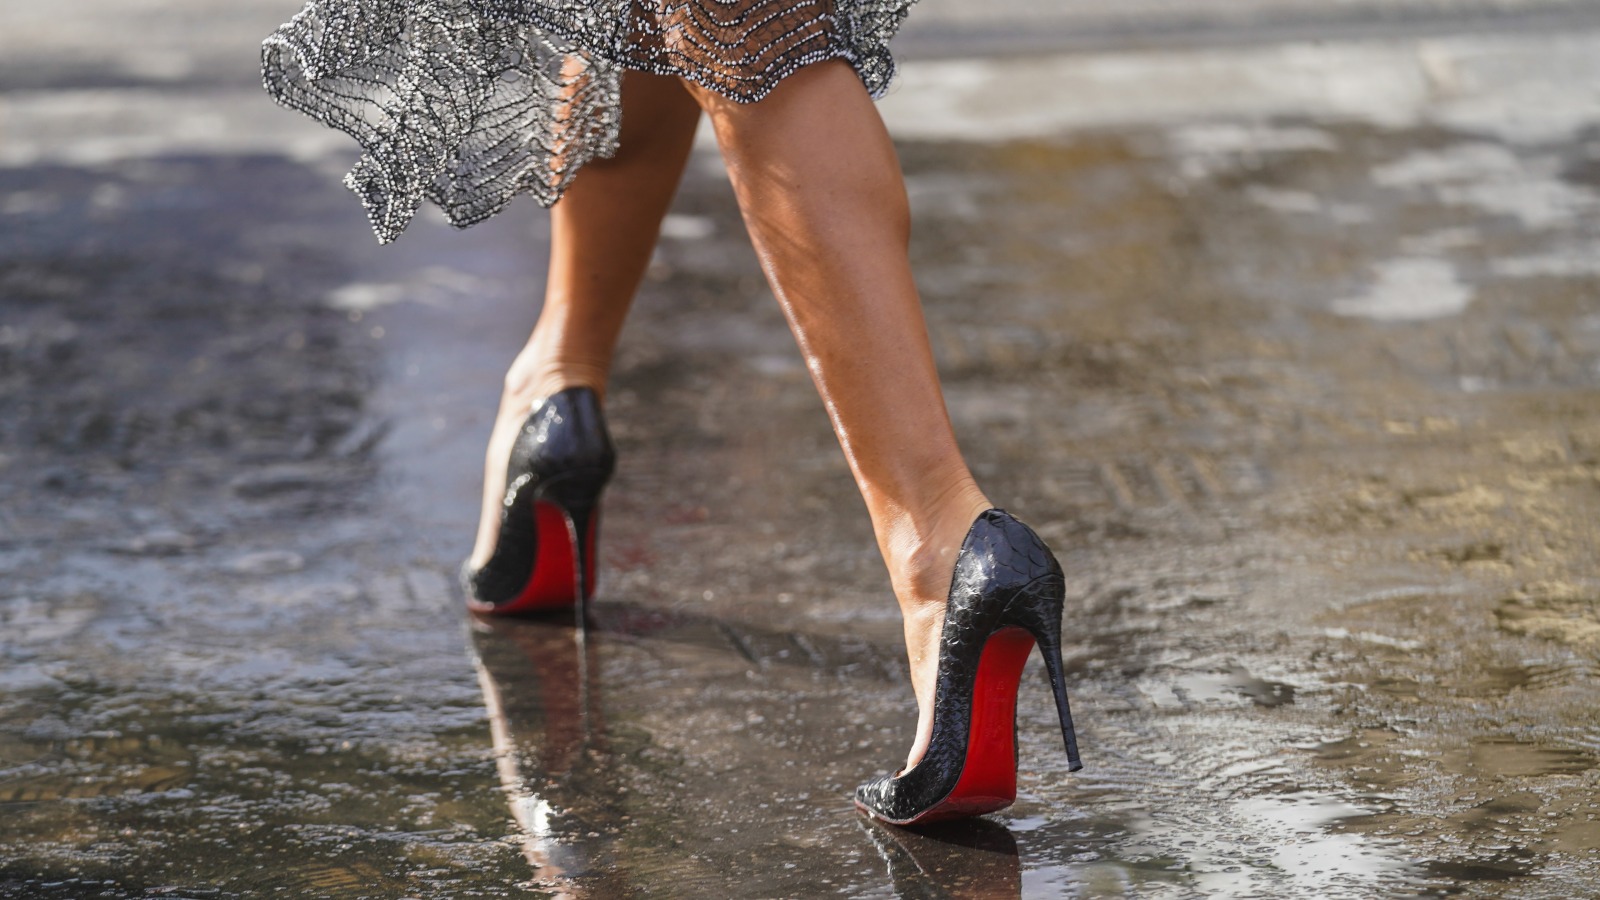 Are Christian Louboutin's Uncomfortable Shoes A Luxury Problem Most Have  Yet To Earn? - Retail Bum